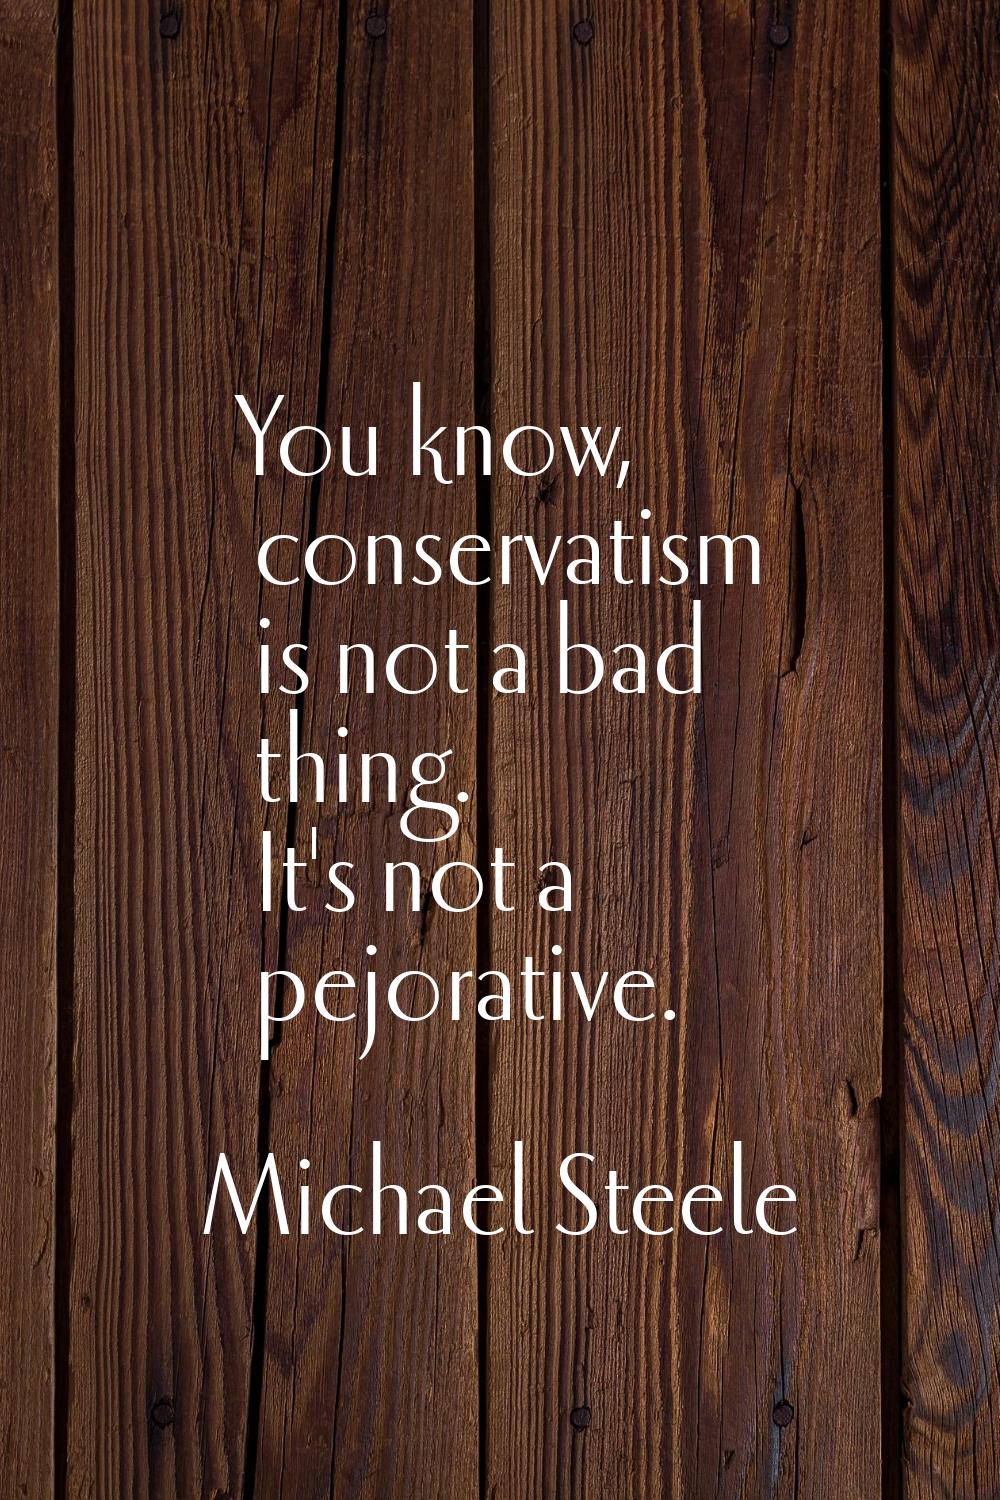 You know, conservatism is not a bad thing. It's not a pejorative.